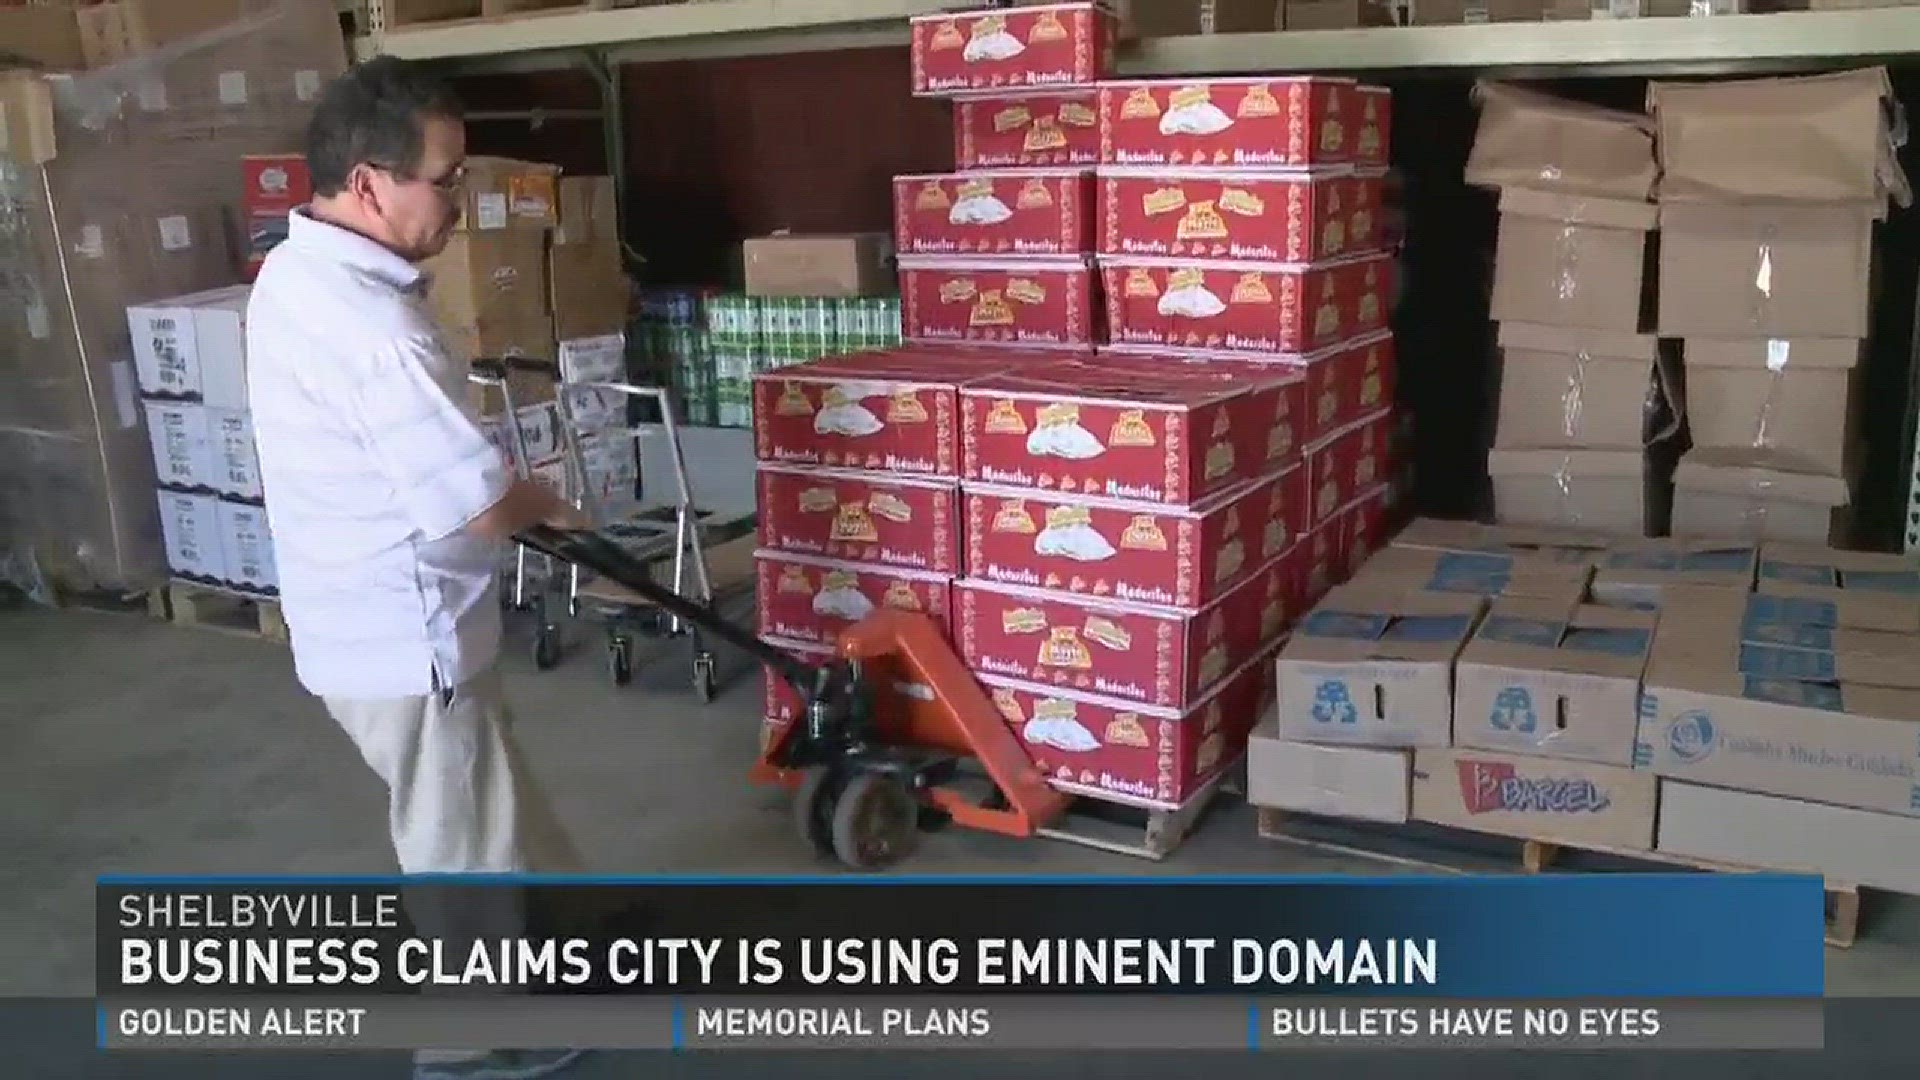 Business claims city is using eminent domain